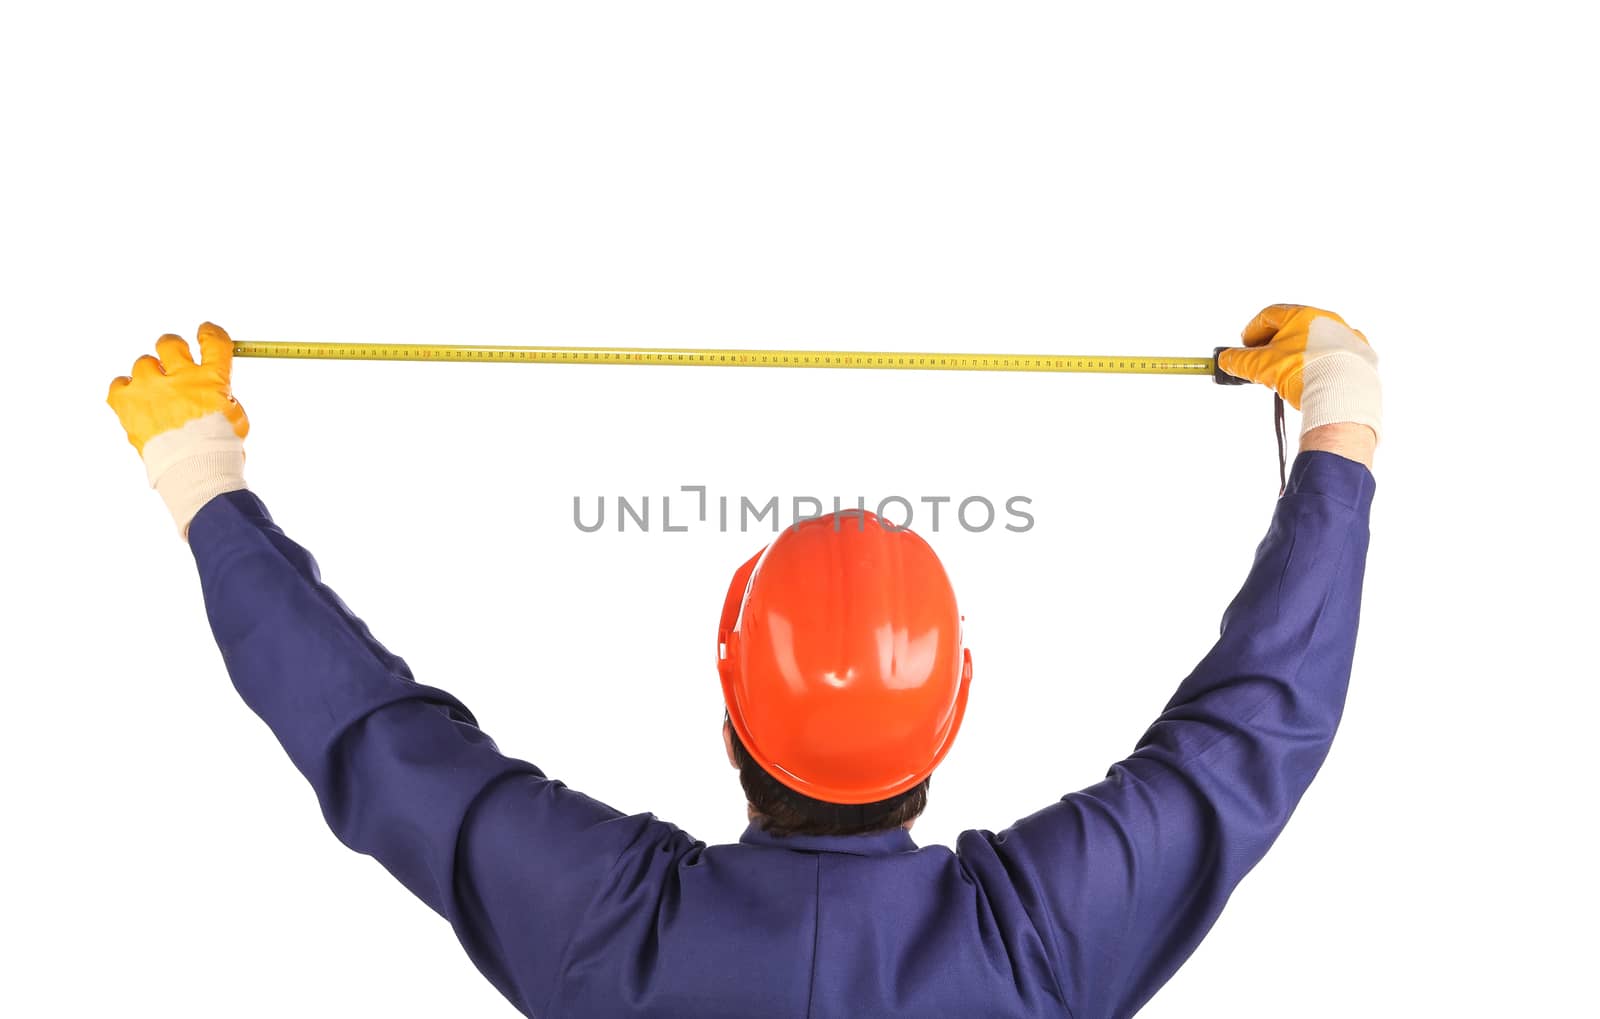 Worker in hardhat with measure ruler. Isolated on a white background.